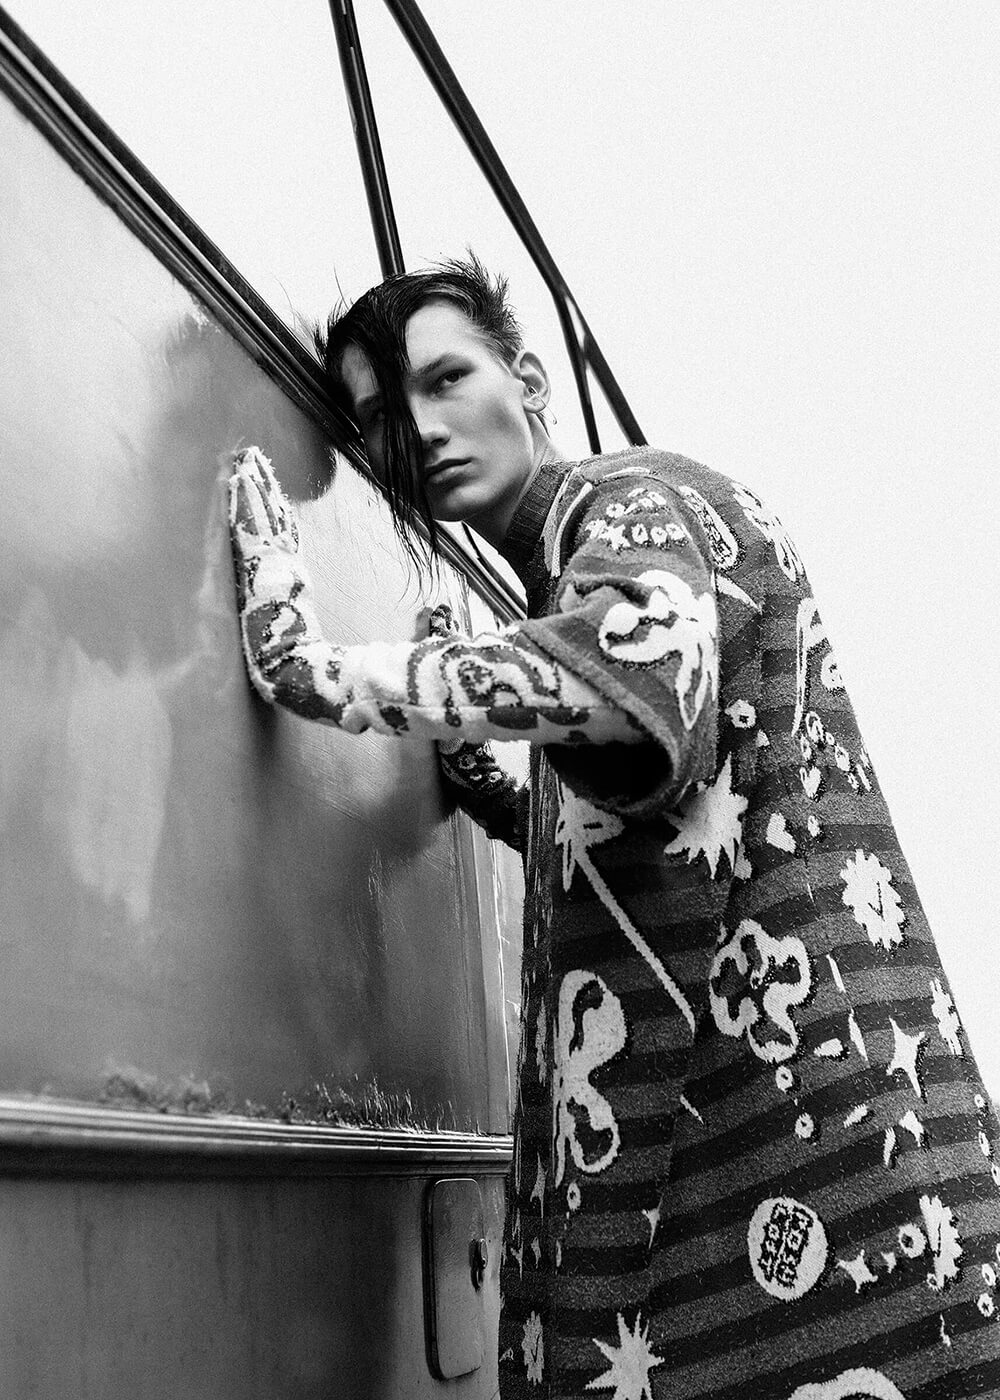 A black and white portrait of a young punk man leaning into an old bus